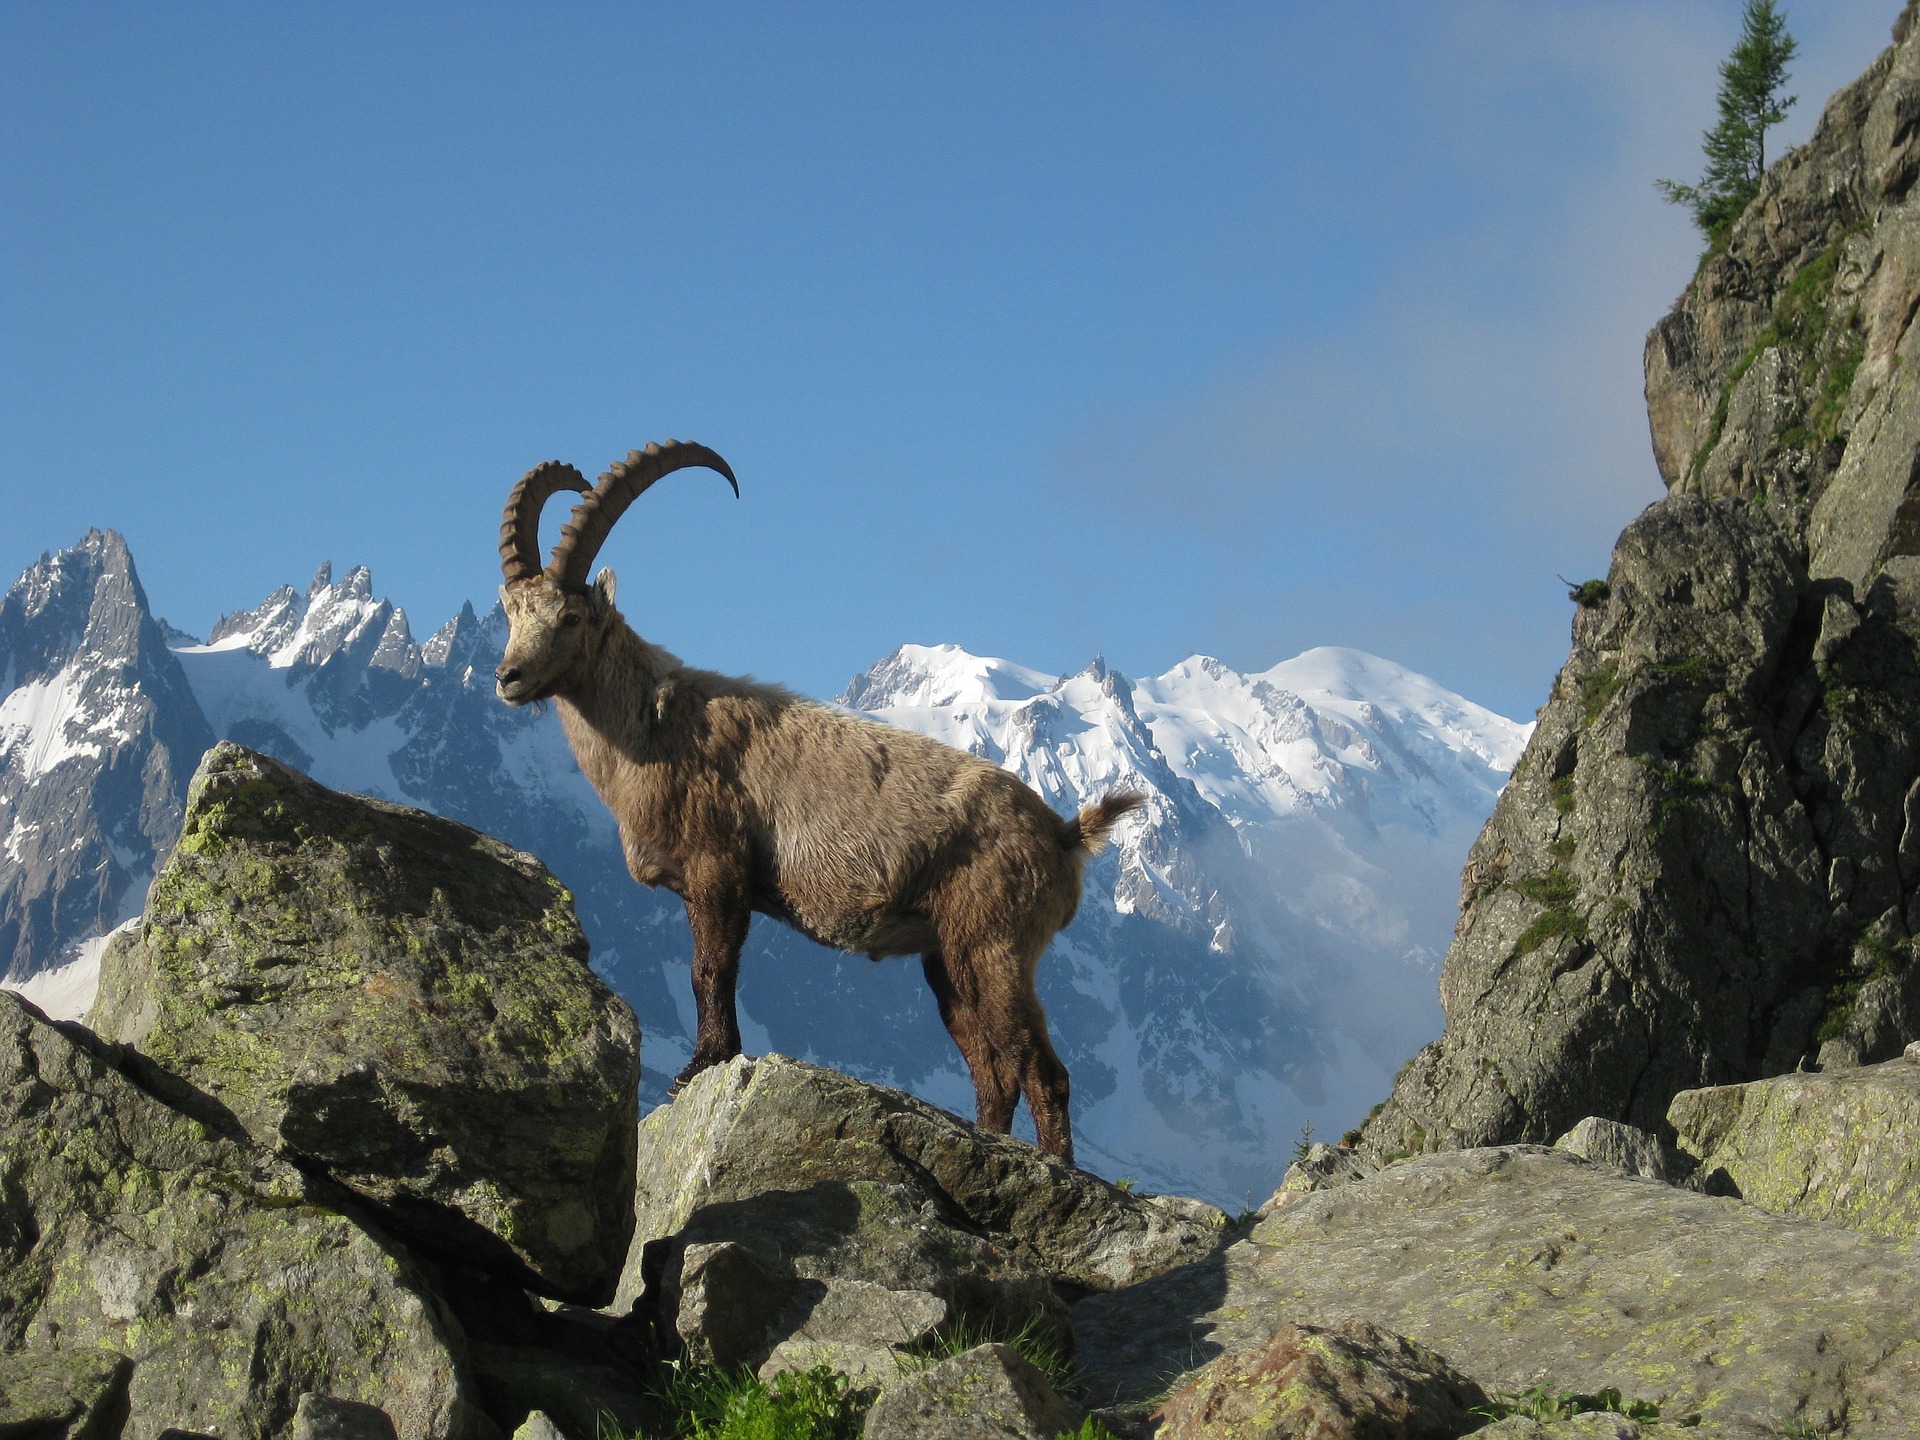 Ibex on a snow capped mountain